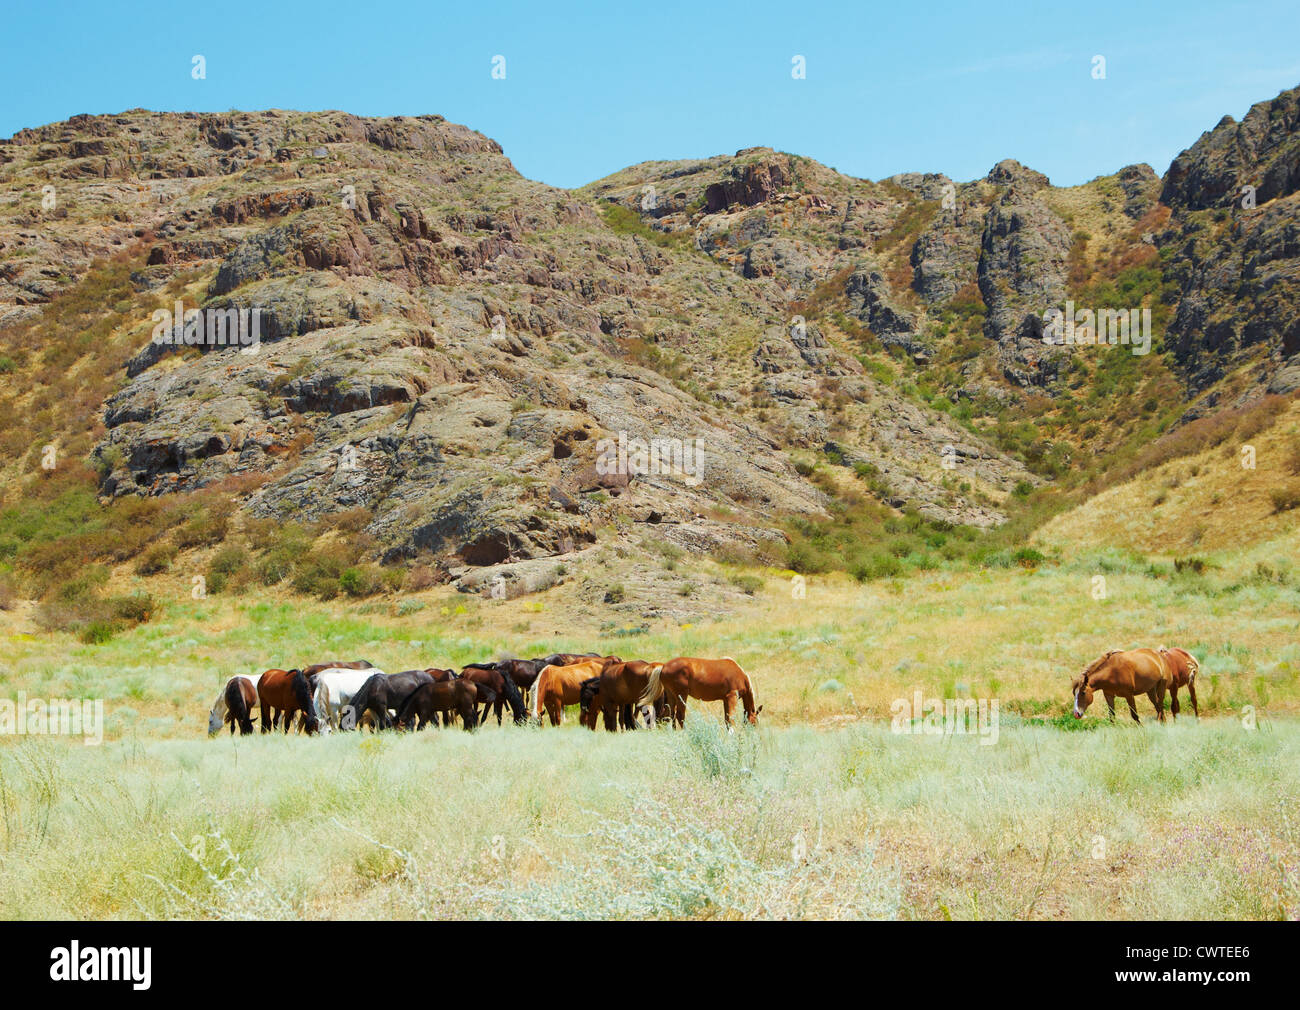 Herd of horses against mountains Stock Photo